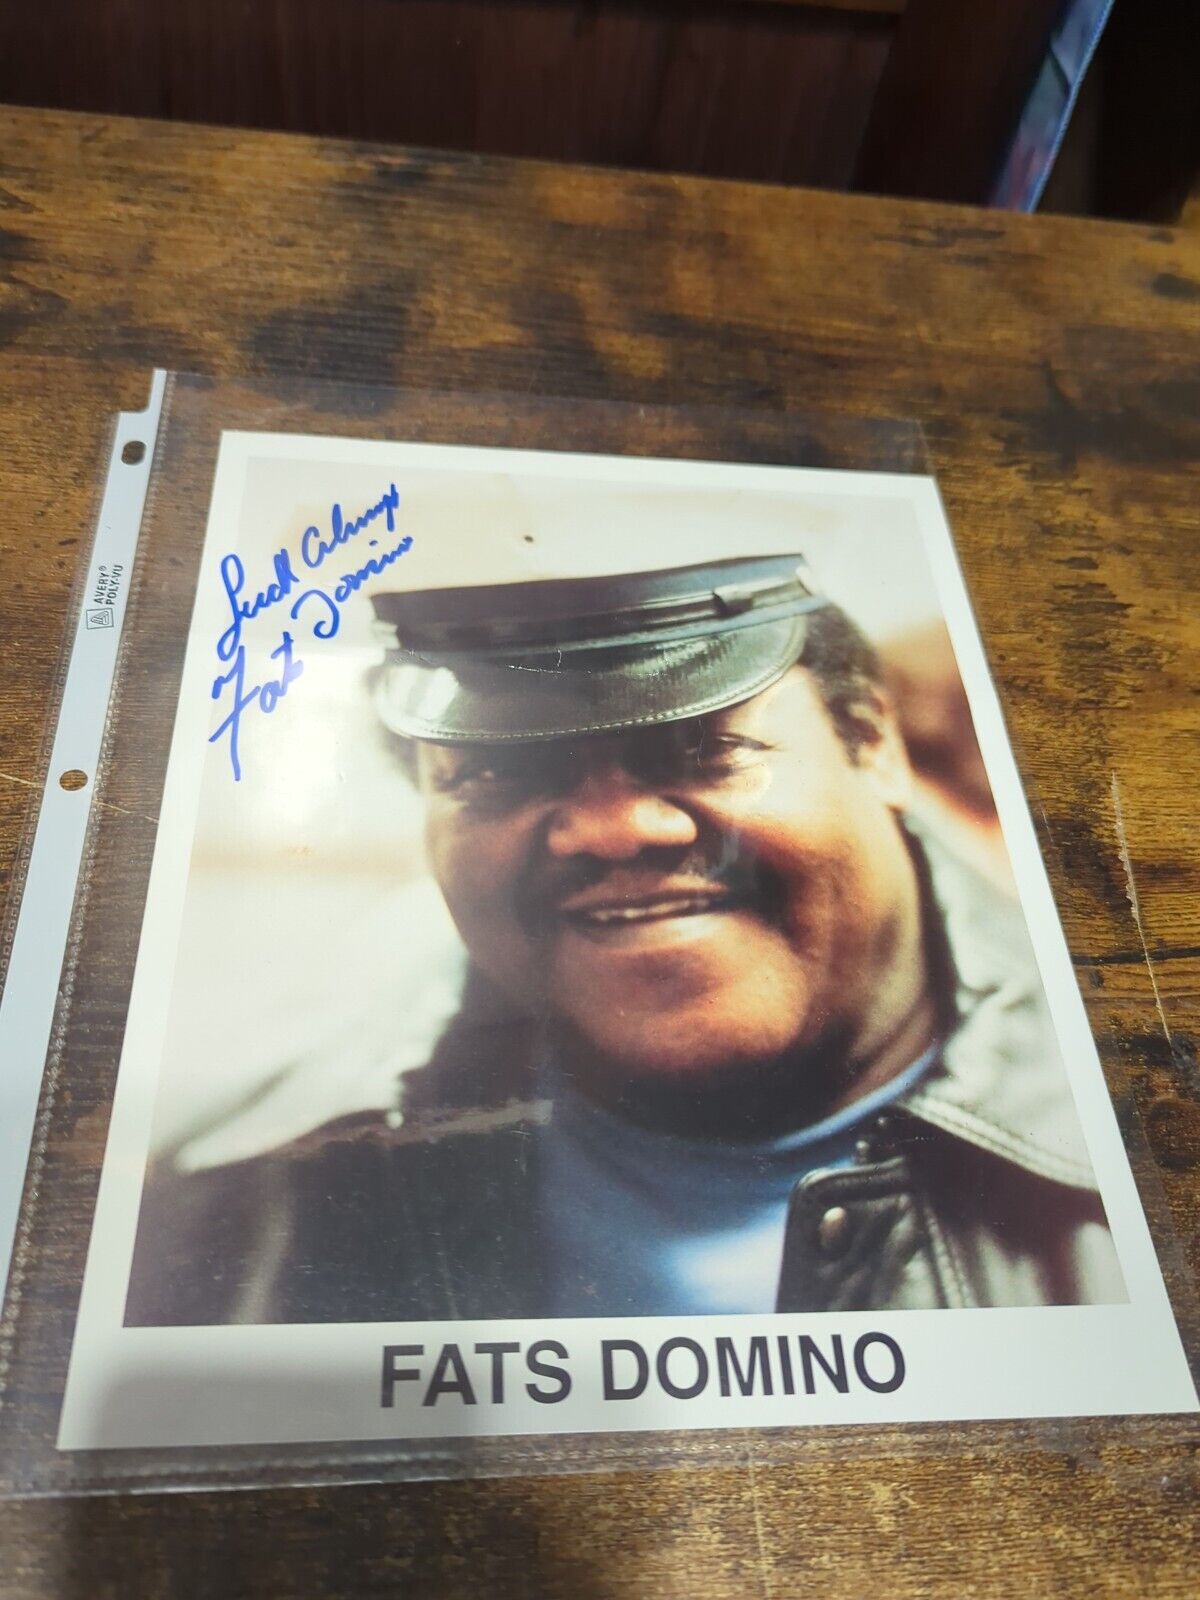 FATS DOMINO Authentic Hand Signed Autograph 8x1 Photo - JAZZ SINGER/SONGWRITER